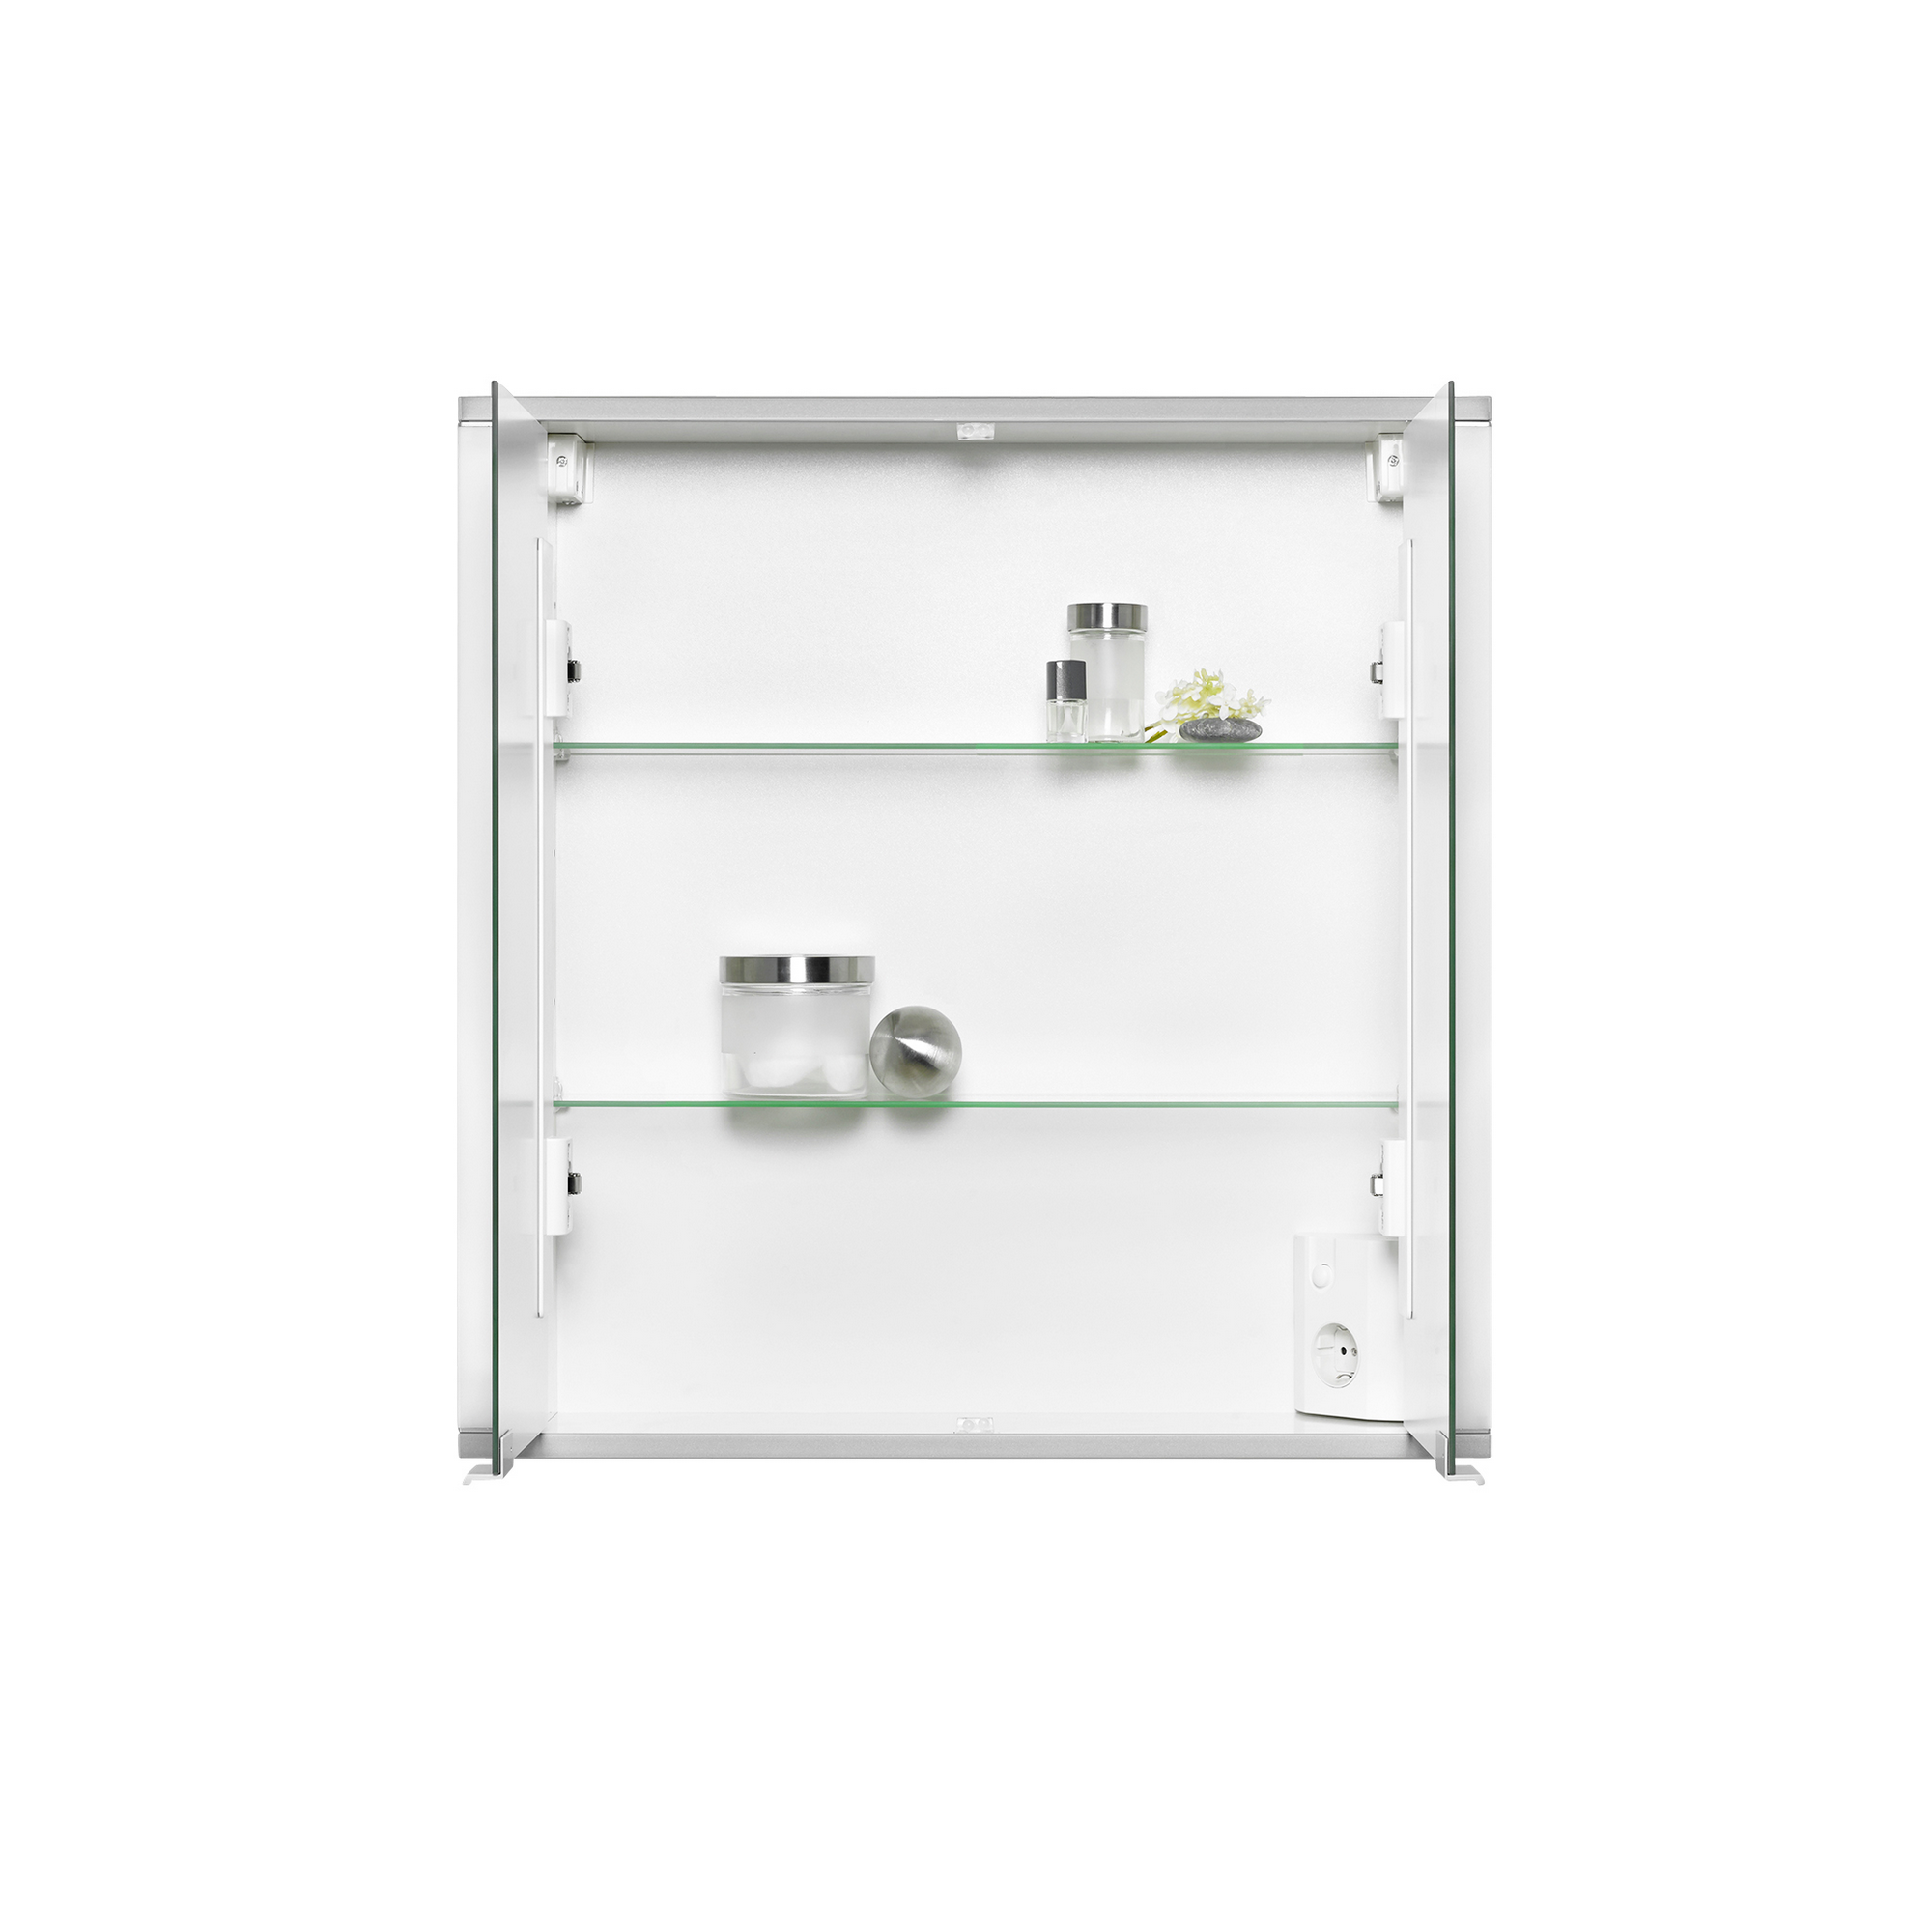 LED-Spiegelschrank 'Marno' weiß 65 x 66 x 15 cm + product picture